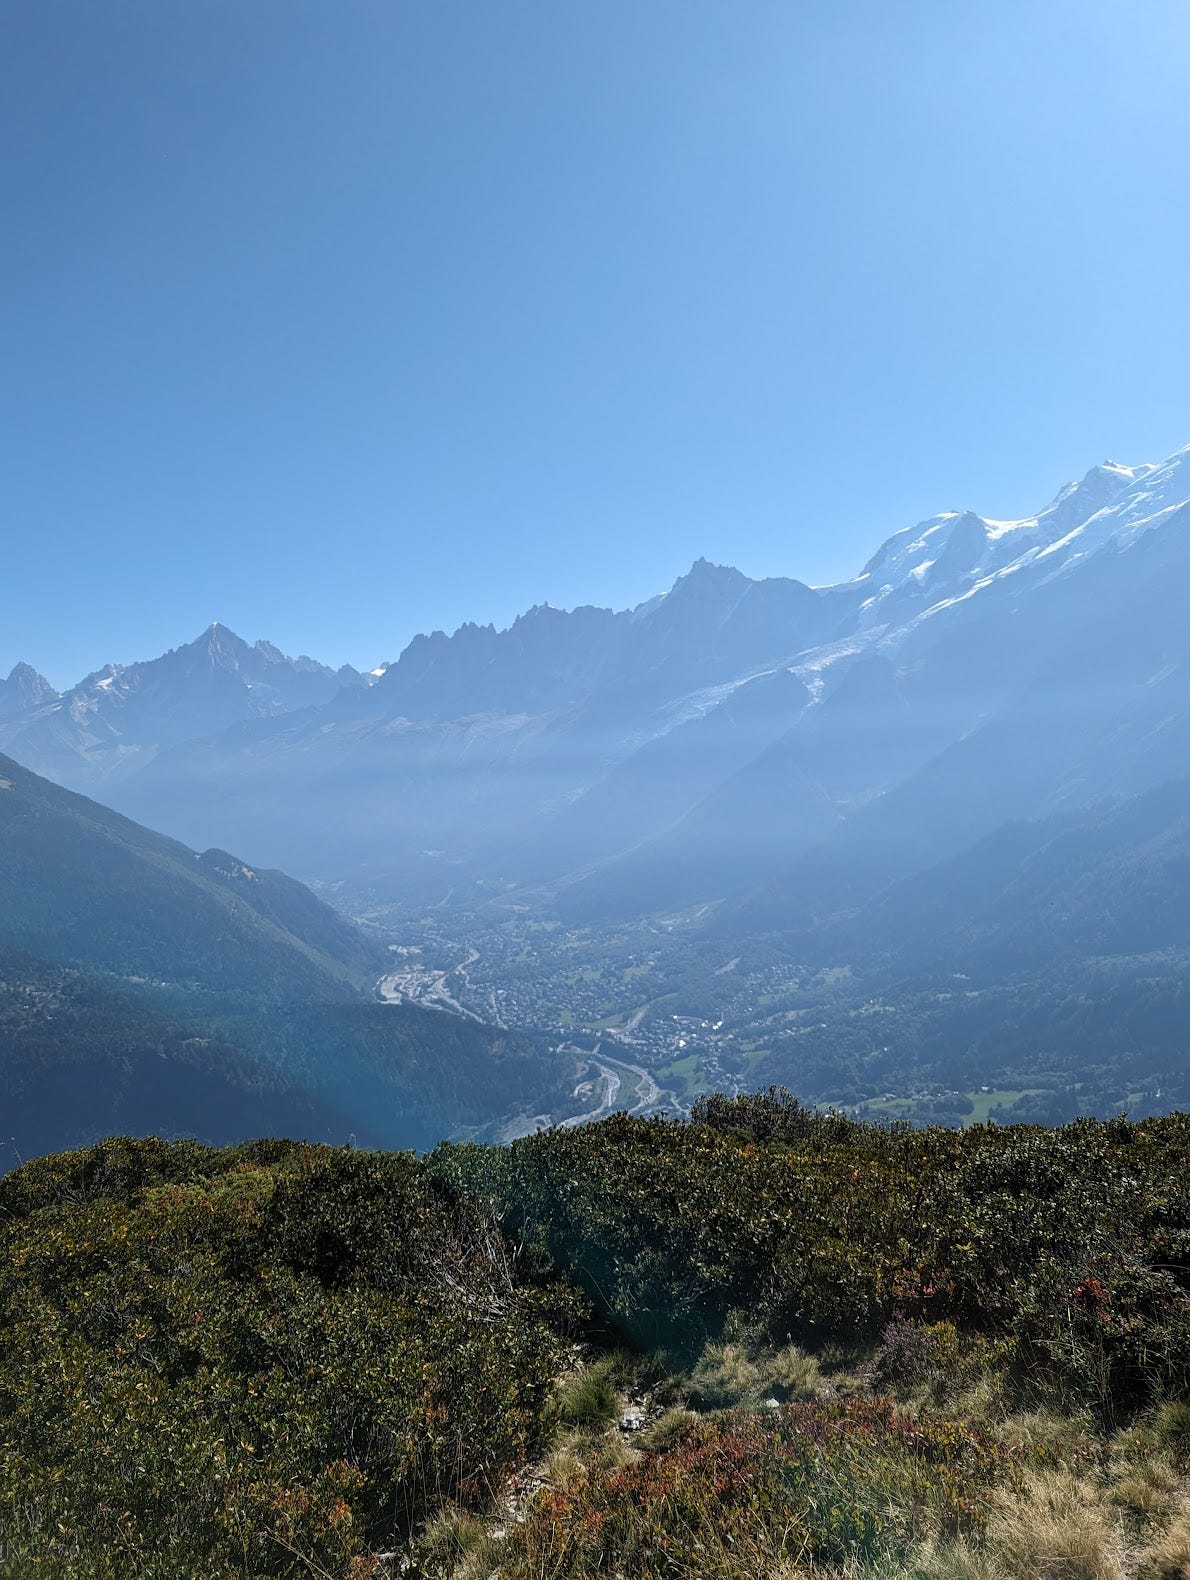 A photo taken from the mountains looking over Chamonix. The town appears small and far away, and mountains rise up along it on both sides.